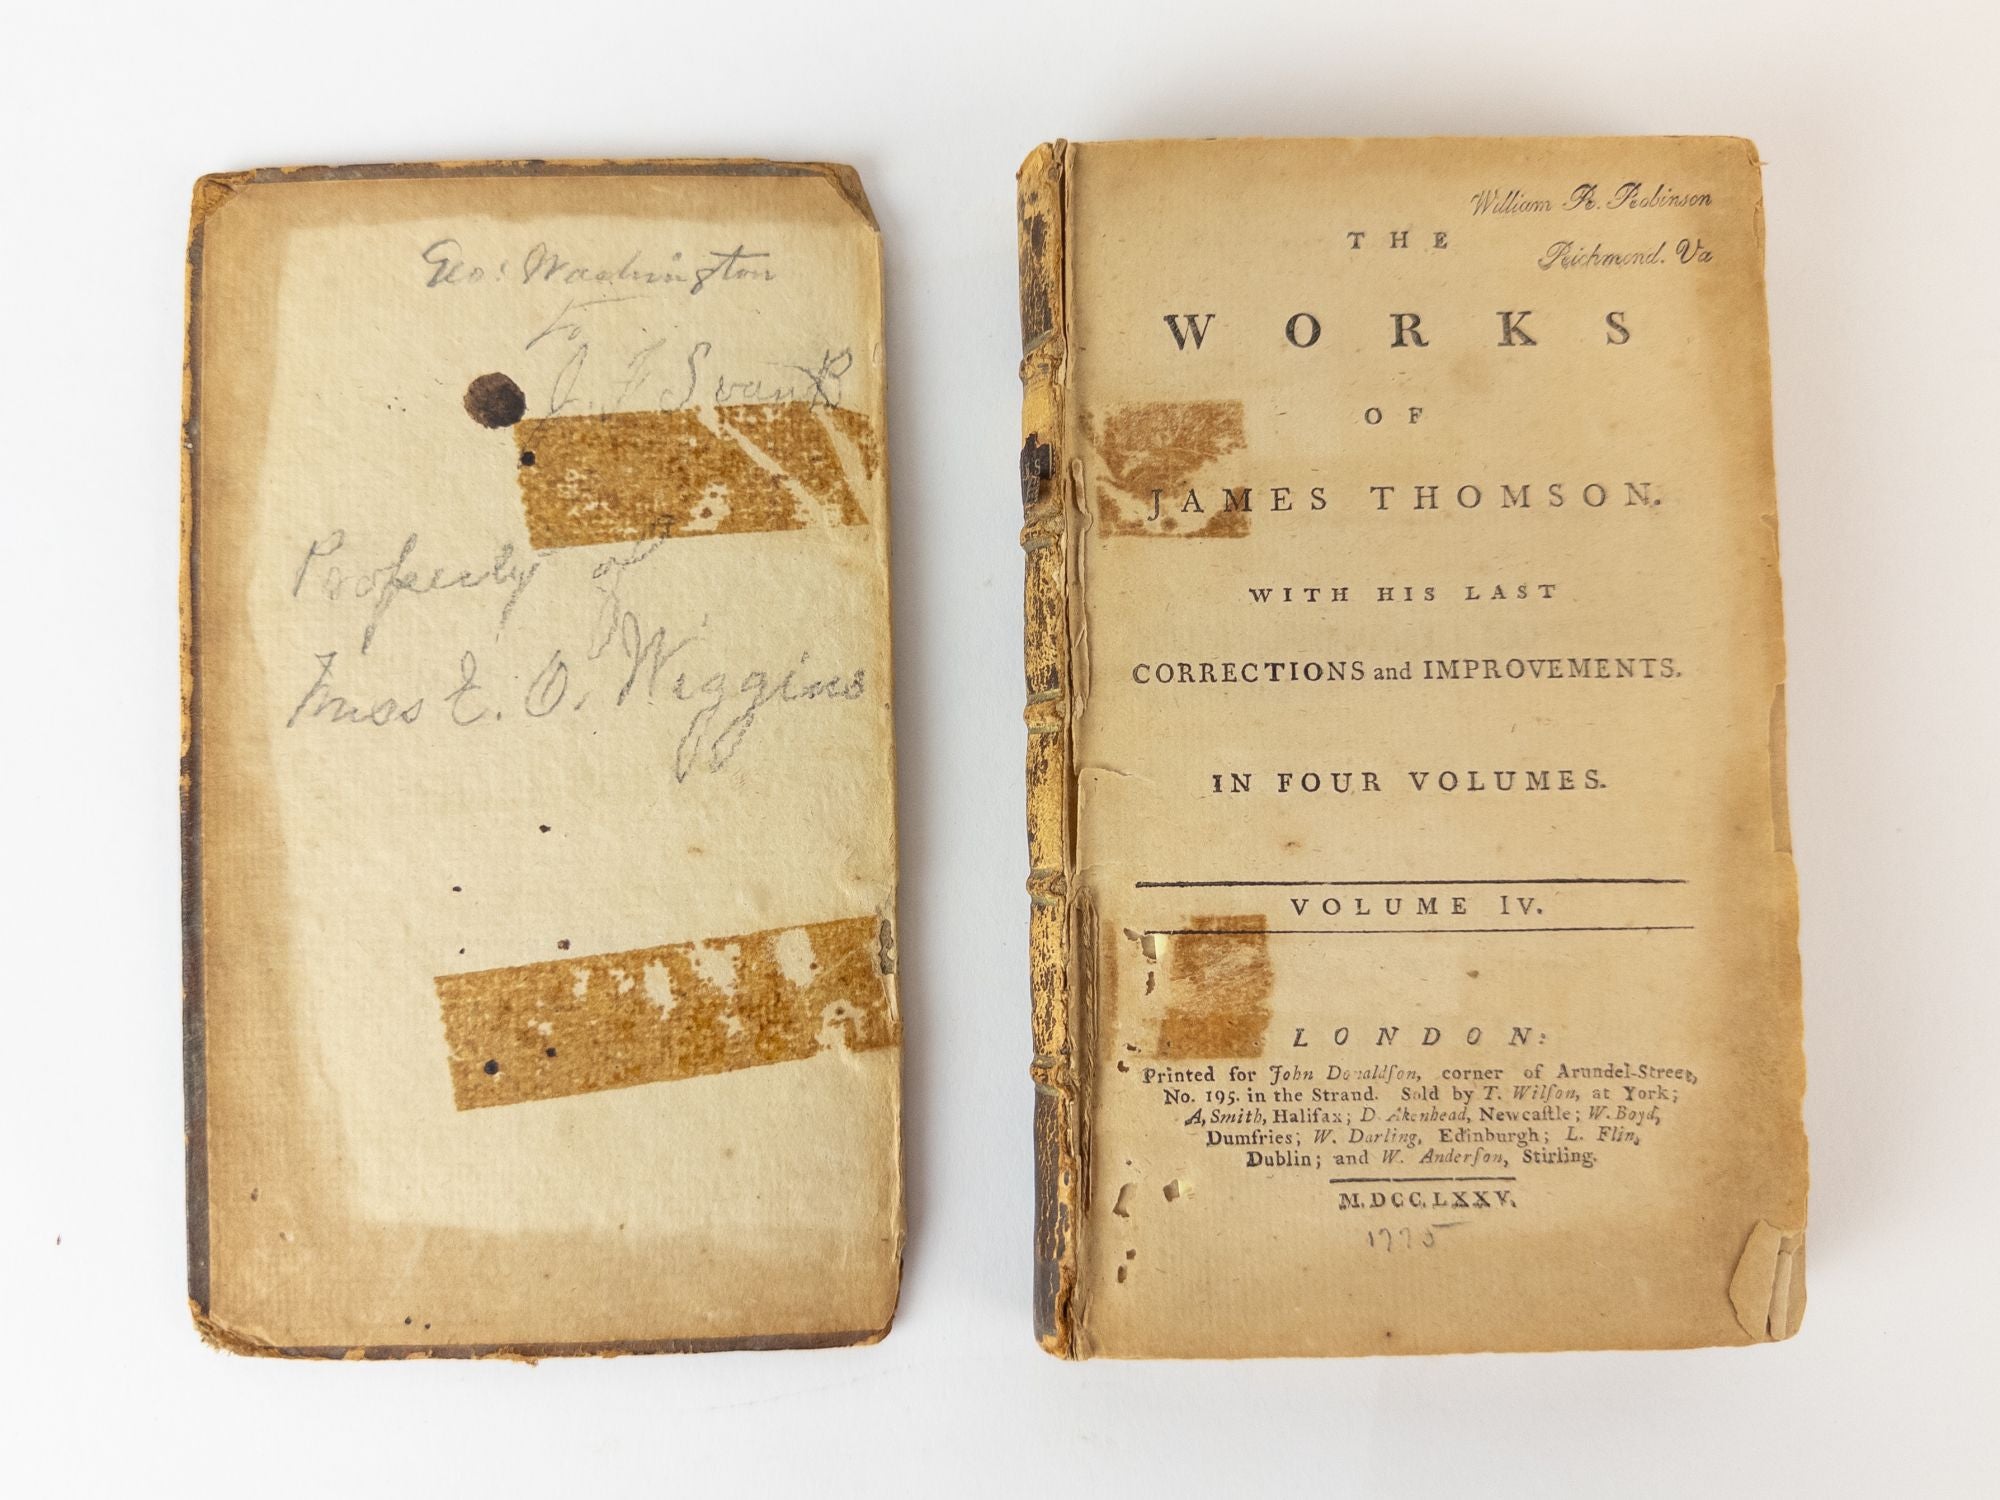 Product Image for THE WORKS OF JAMES THOMSON [Volume one only] [Mount Vernon copy]